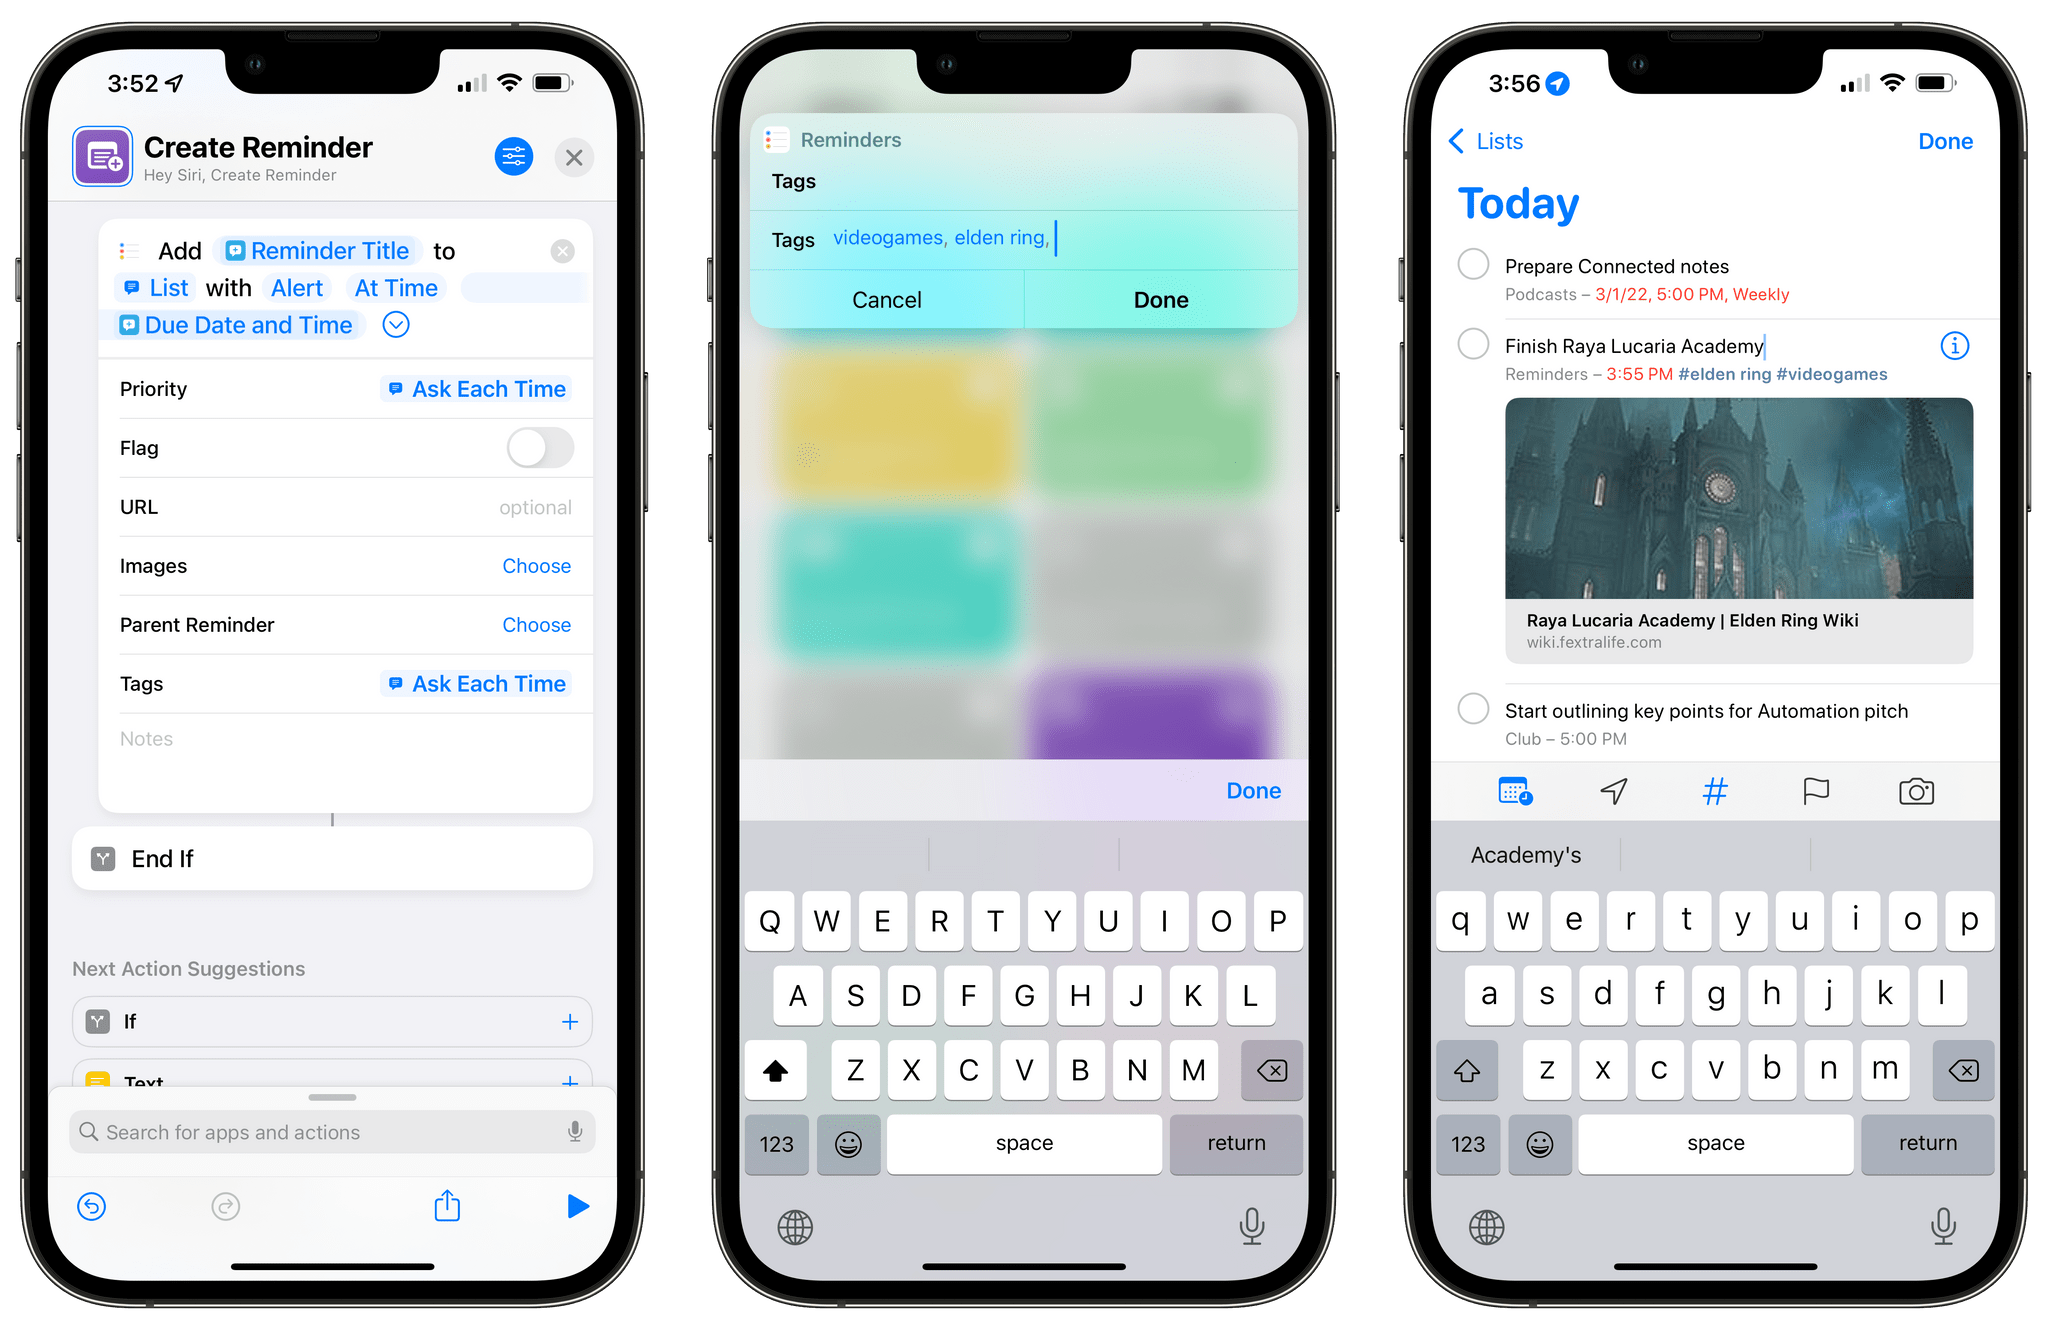 Creating reminders with tags from Shortcuts in iOS 15.4.